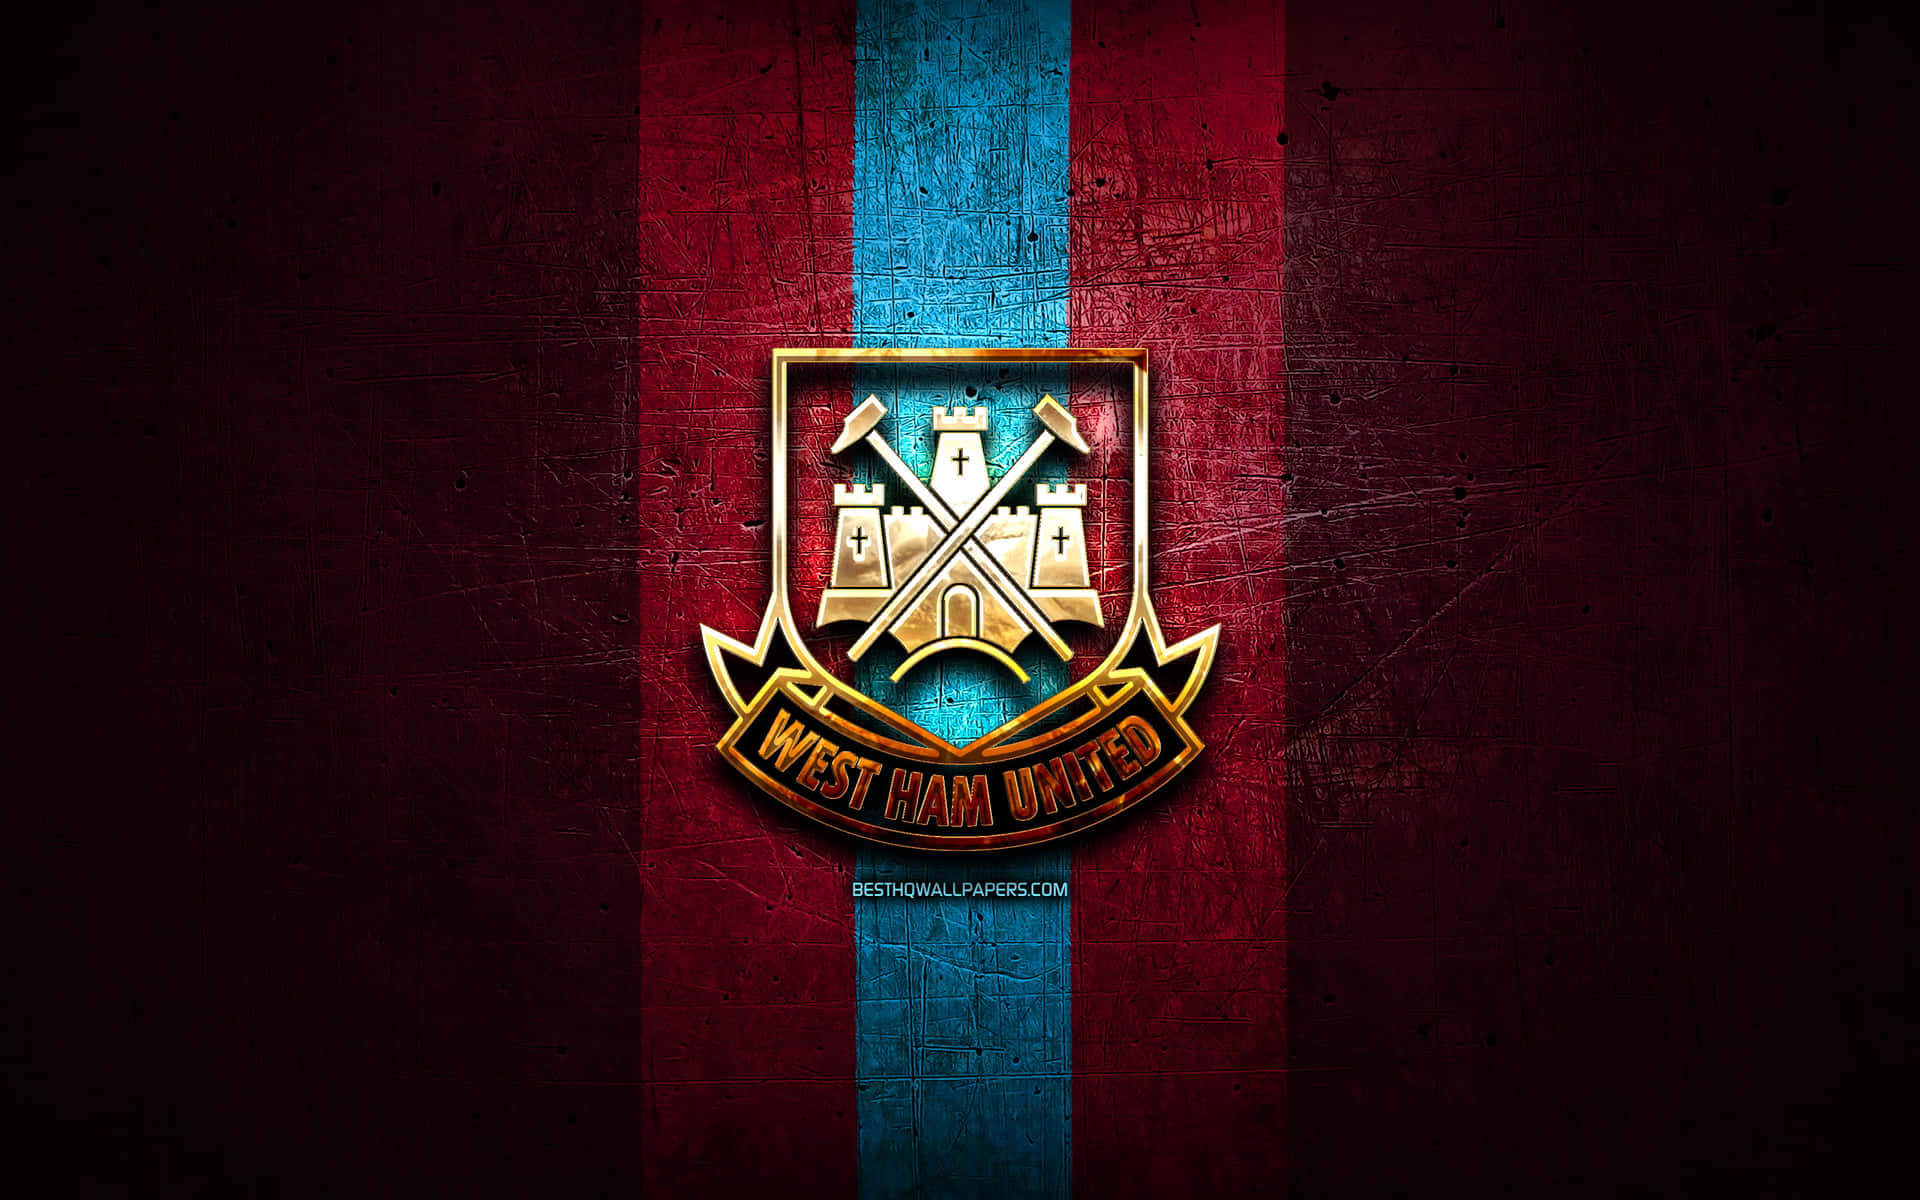 West Ham United Fc Players Prepared For Victory On Field Wallpaper